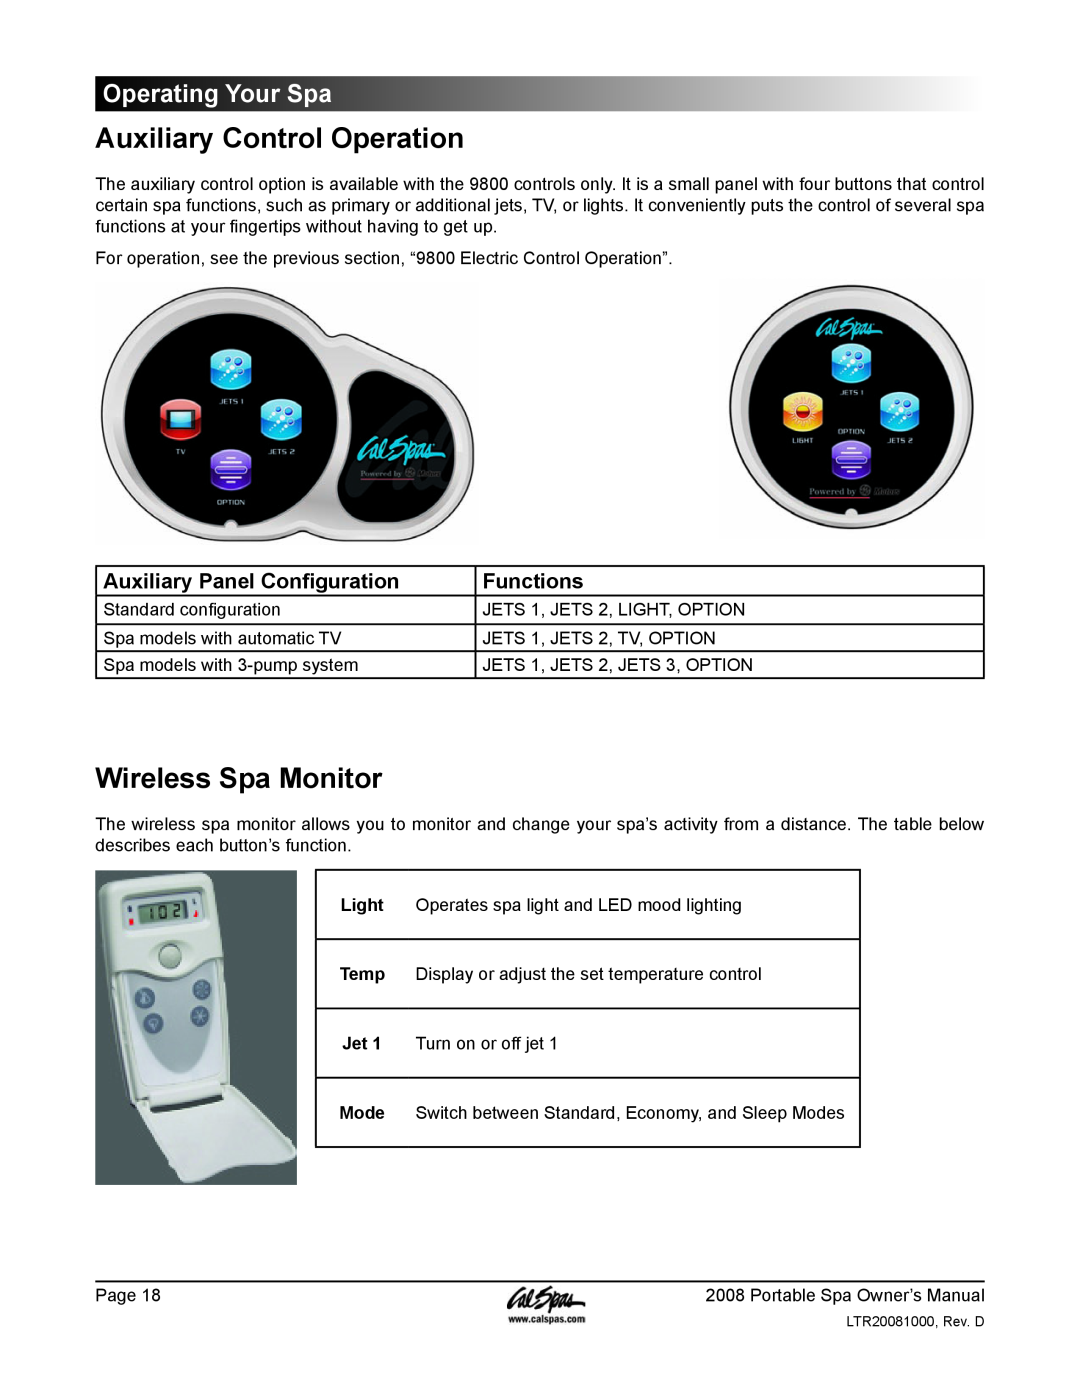 Cal Spas GFCI manual Auxiliary Control Operation, Wireless Spa Monitor, Auxiliary Panel Configuration, Functions 